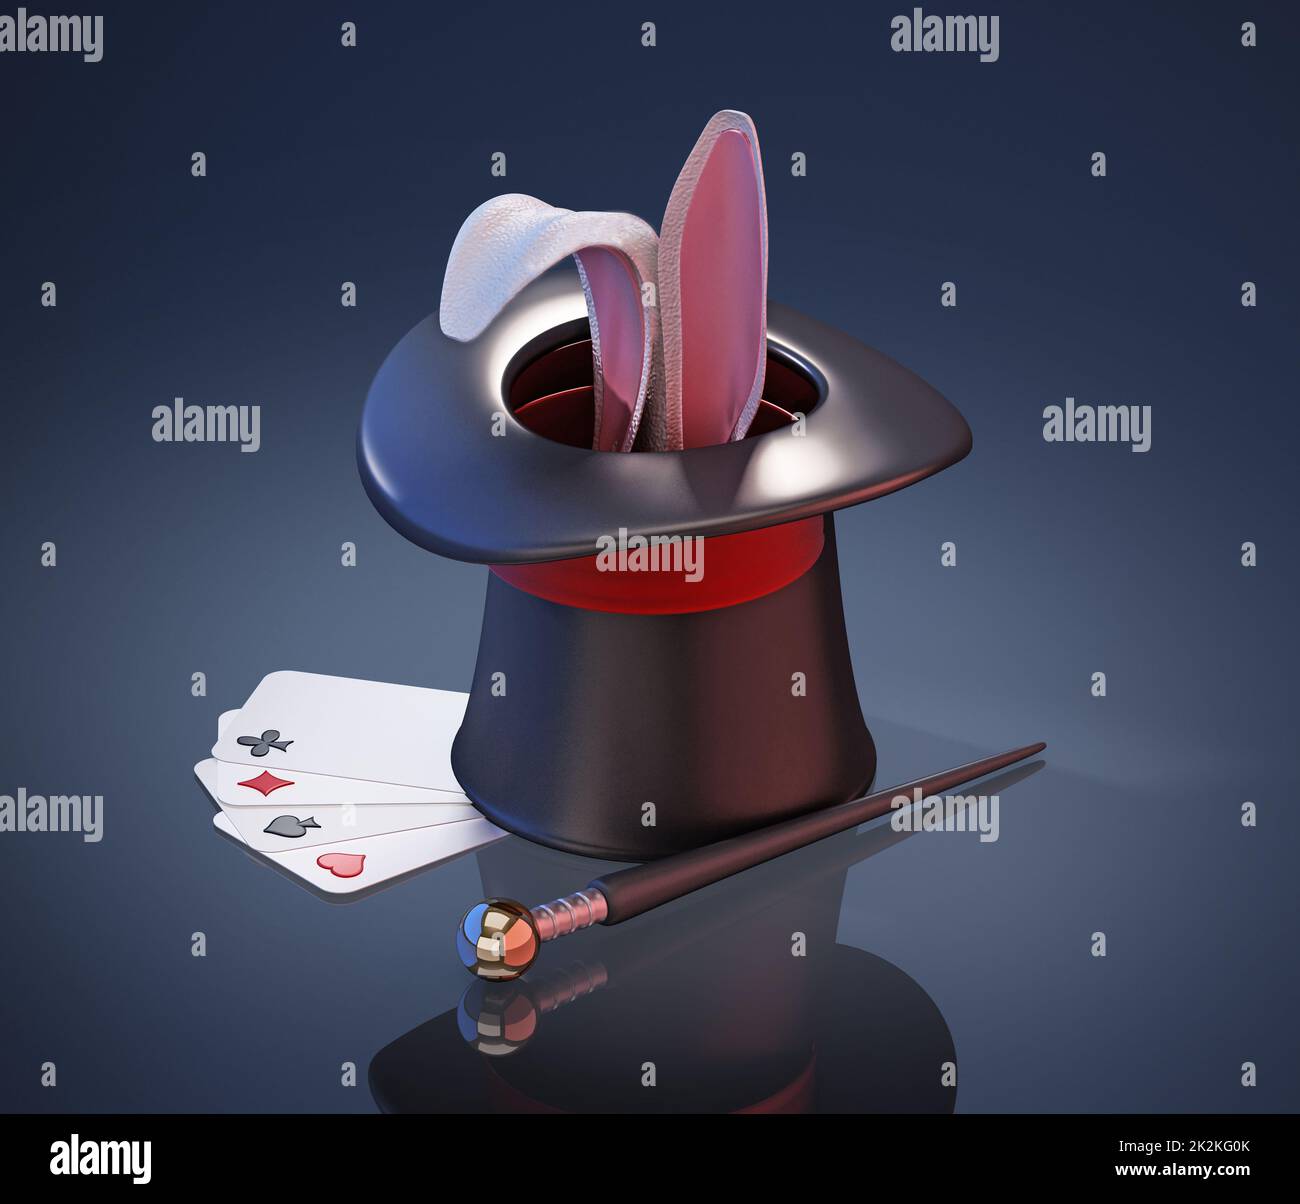 Illusionist hat, stick, playing cards and rabbit ears on black background. 3D illustration Stock Photo